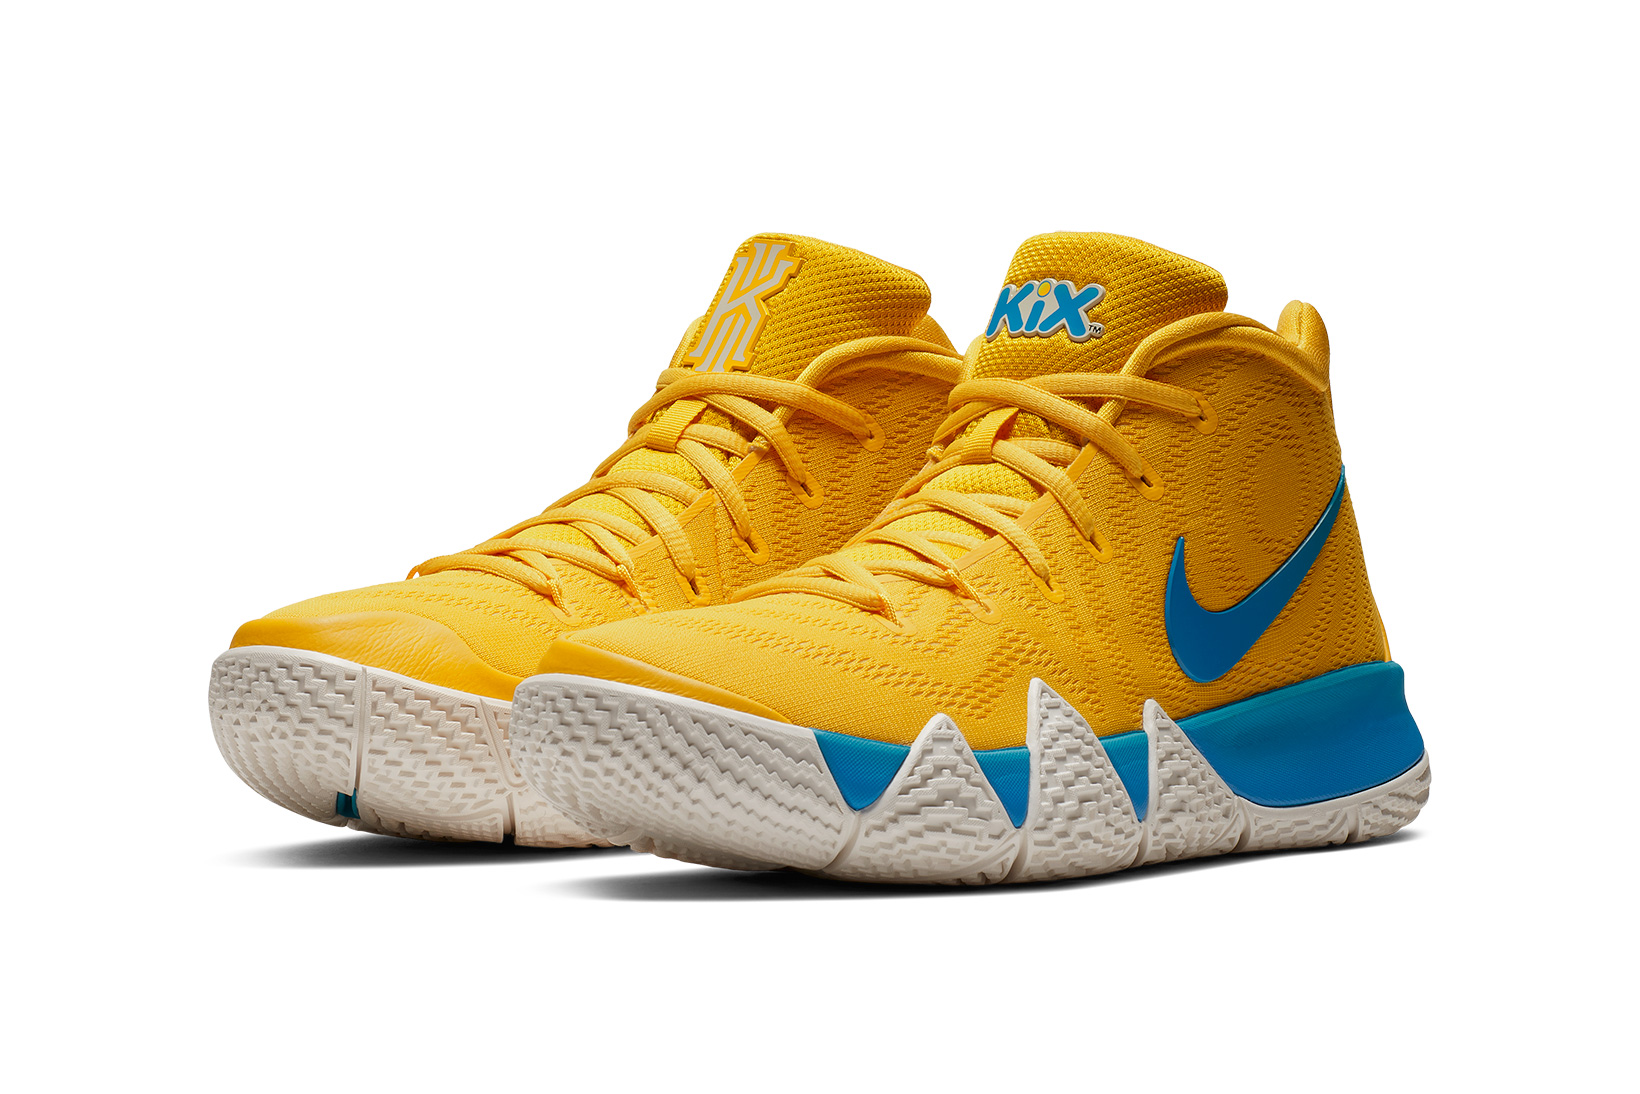 kyrie irving shoes cereal